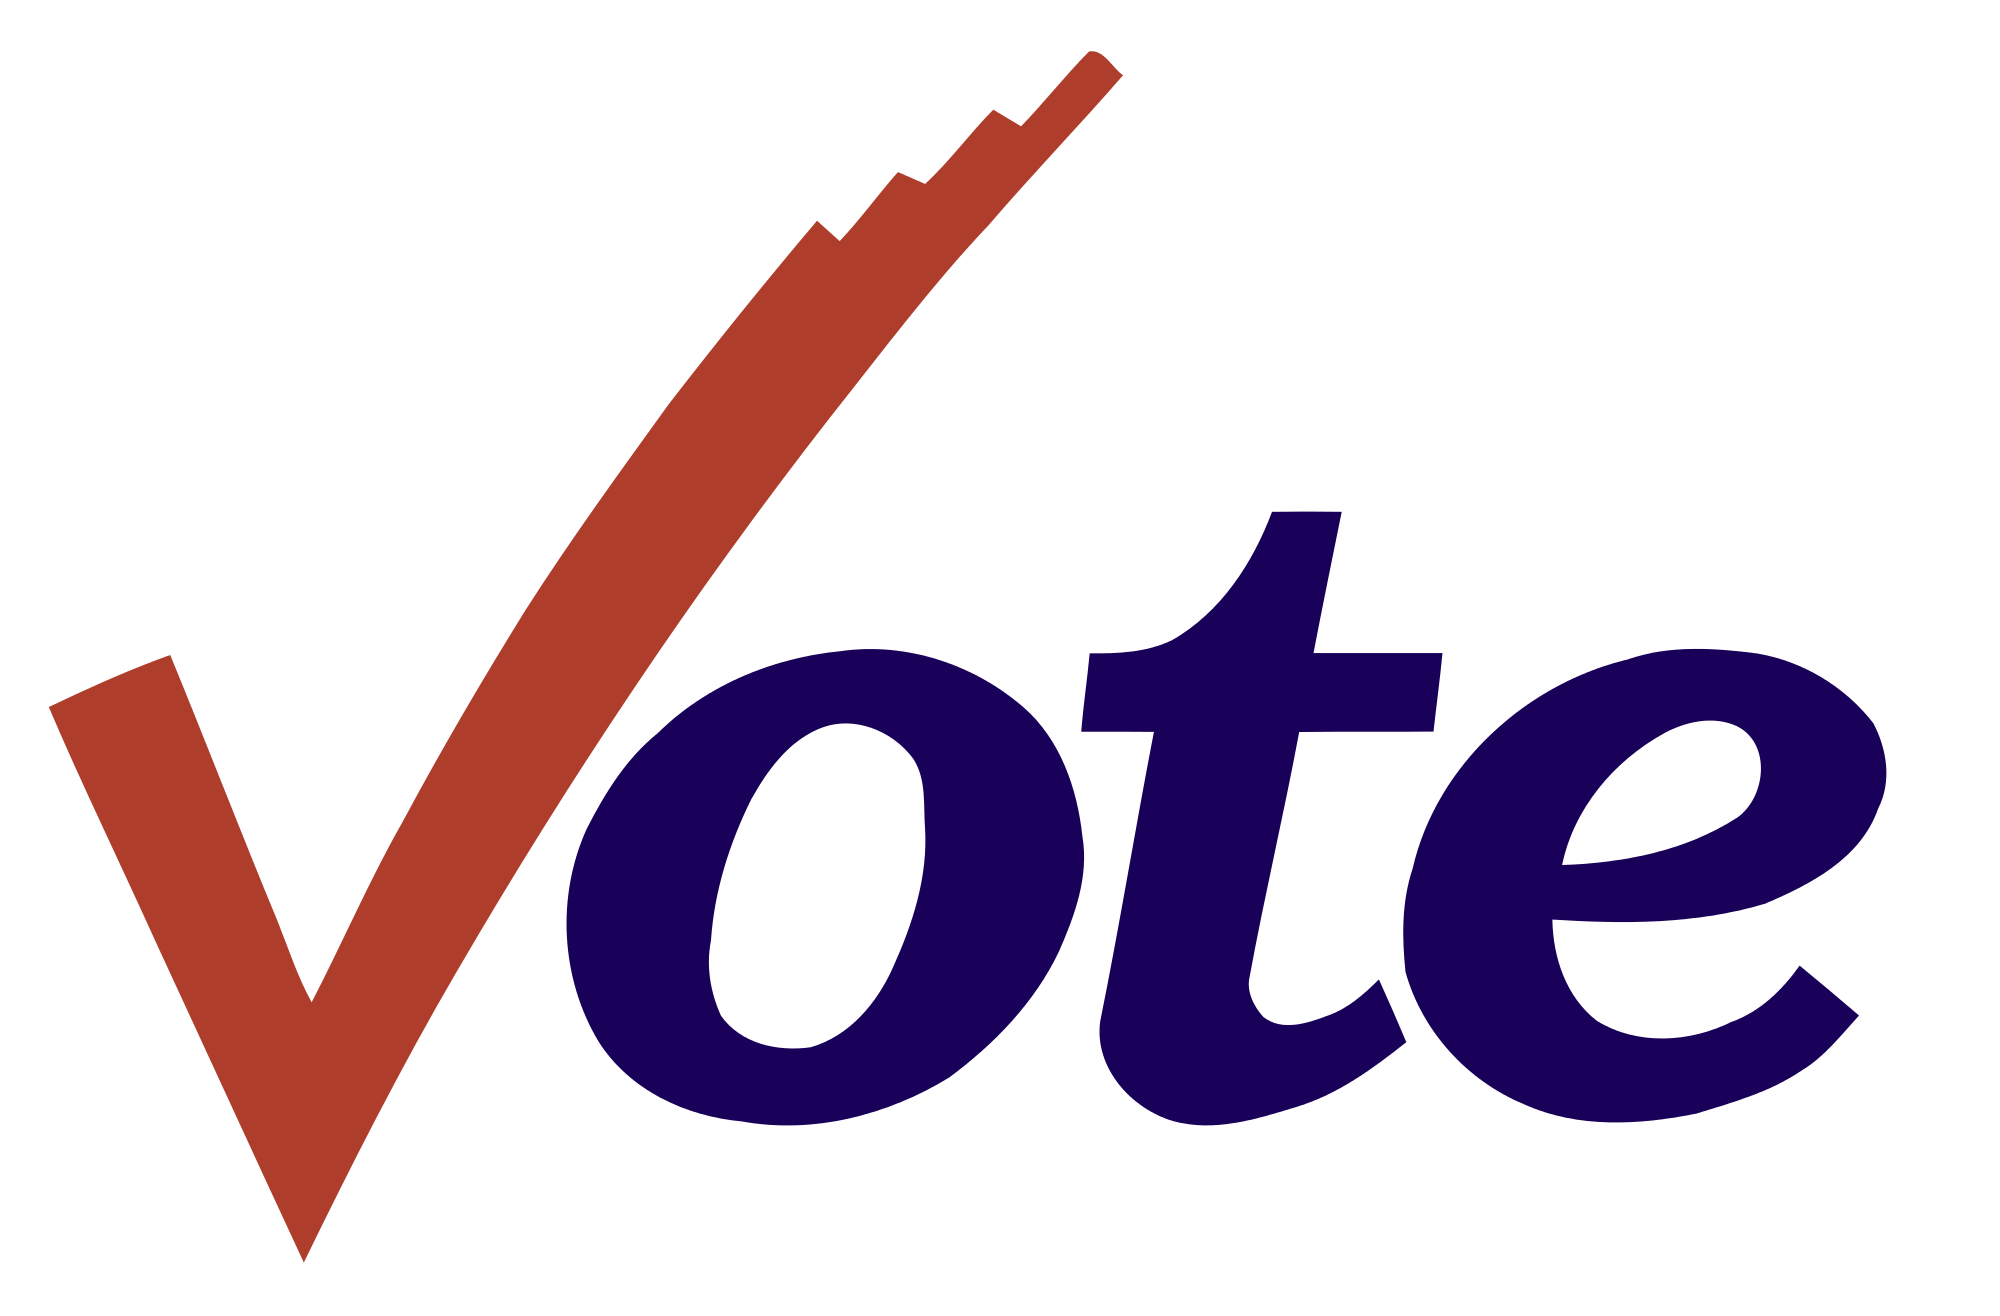 Clip art of the word "Vote"